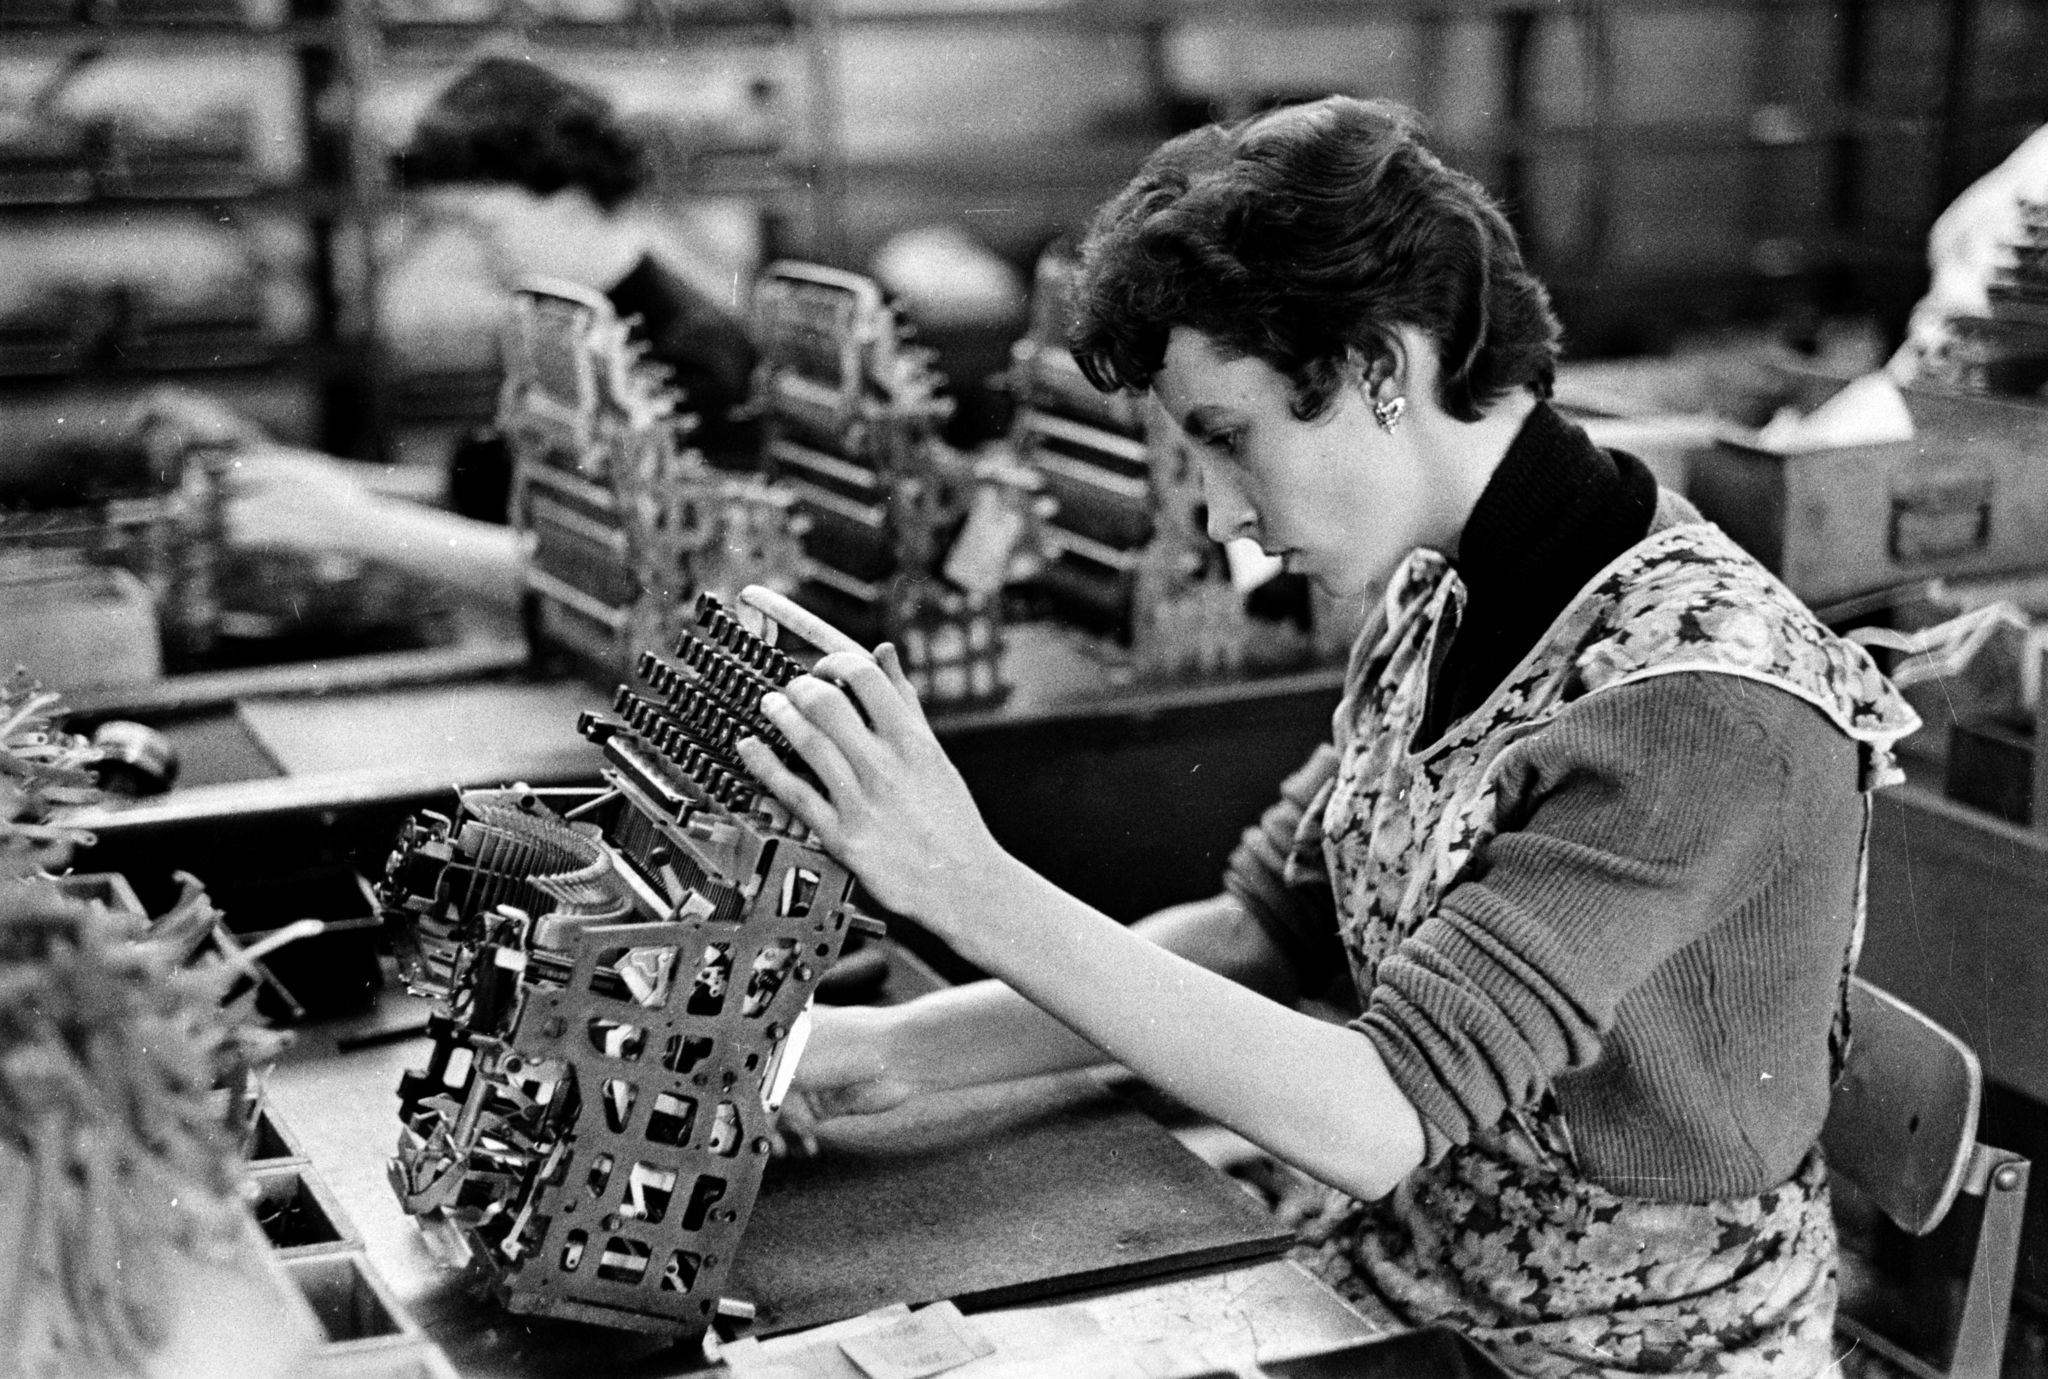 20th August 1955: A worker at the British Olivetti factory on the Queenslie Industrial Estate, Glasgow, assembling a portable typewriter. The factory is highly modernised and makes machines primarily for export to Australia, New Zealand and Africa. Original Publication: Picture Post - 7942 - Let Glasgow Flourish! - pub. 1955 (Photo by Haywood Magee/Picture Post/Hulton Archive/Getty Images)